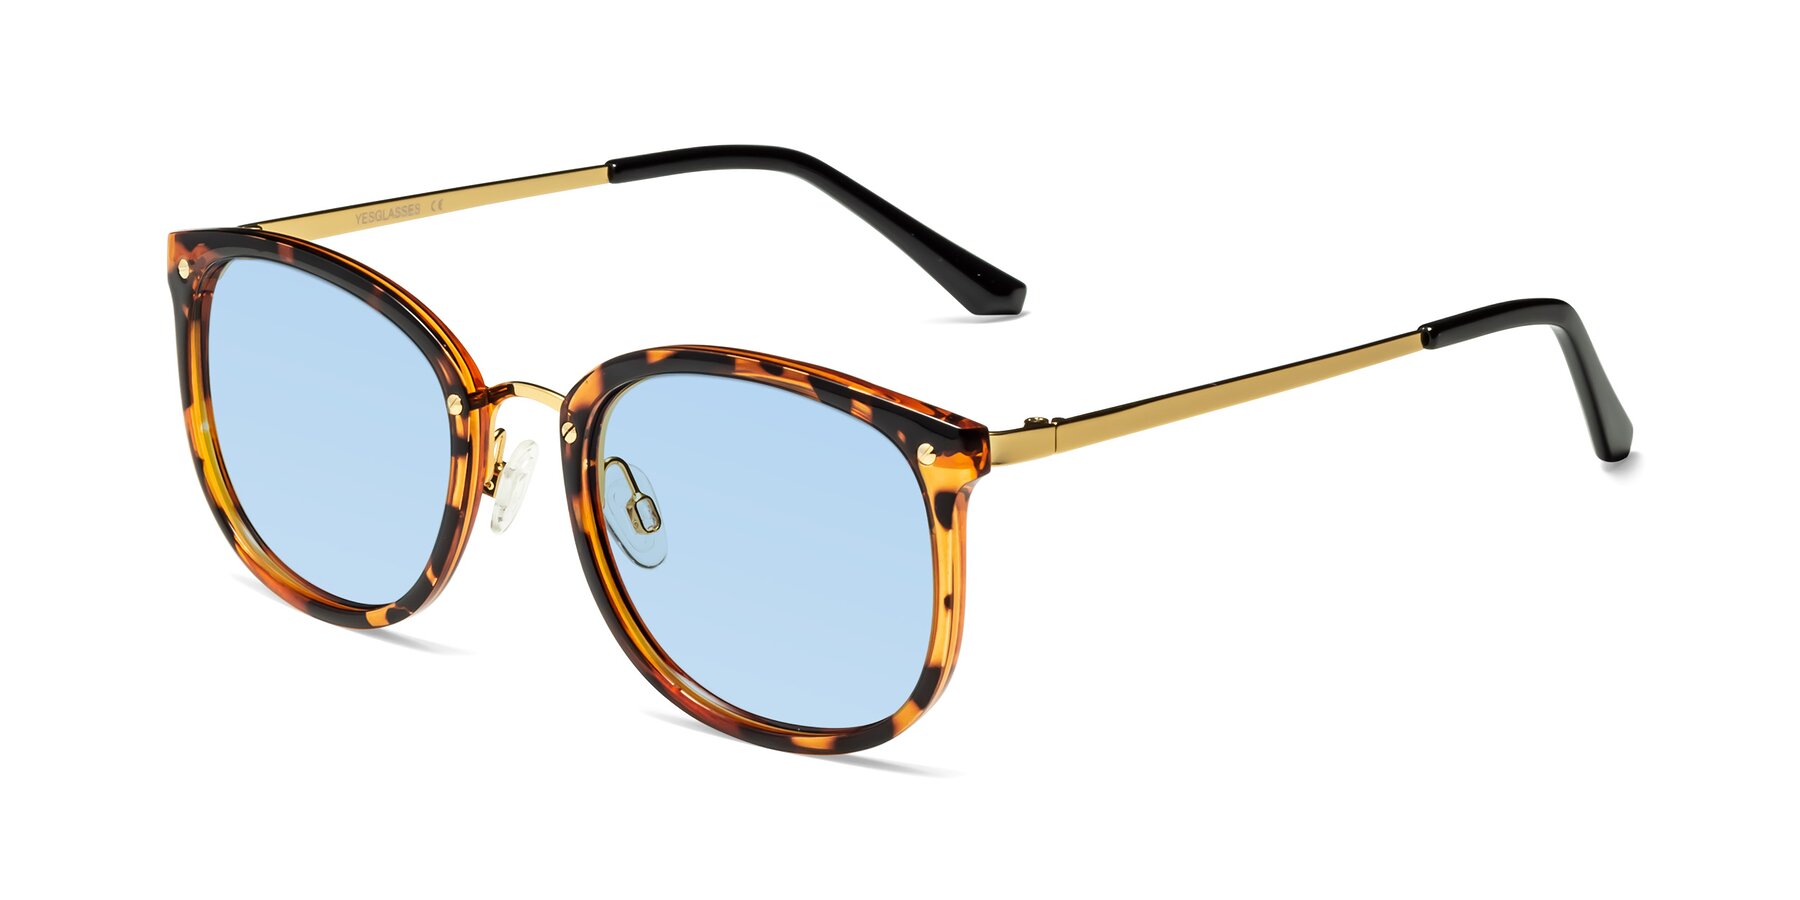 Angle of Timeless in Tortoise-Golden with Light Blue Tinted Lenses